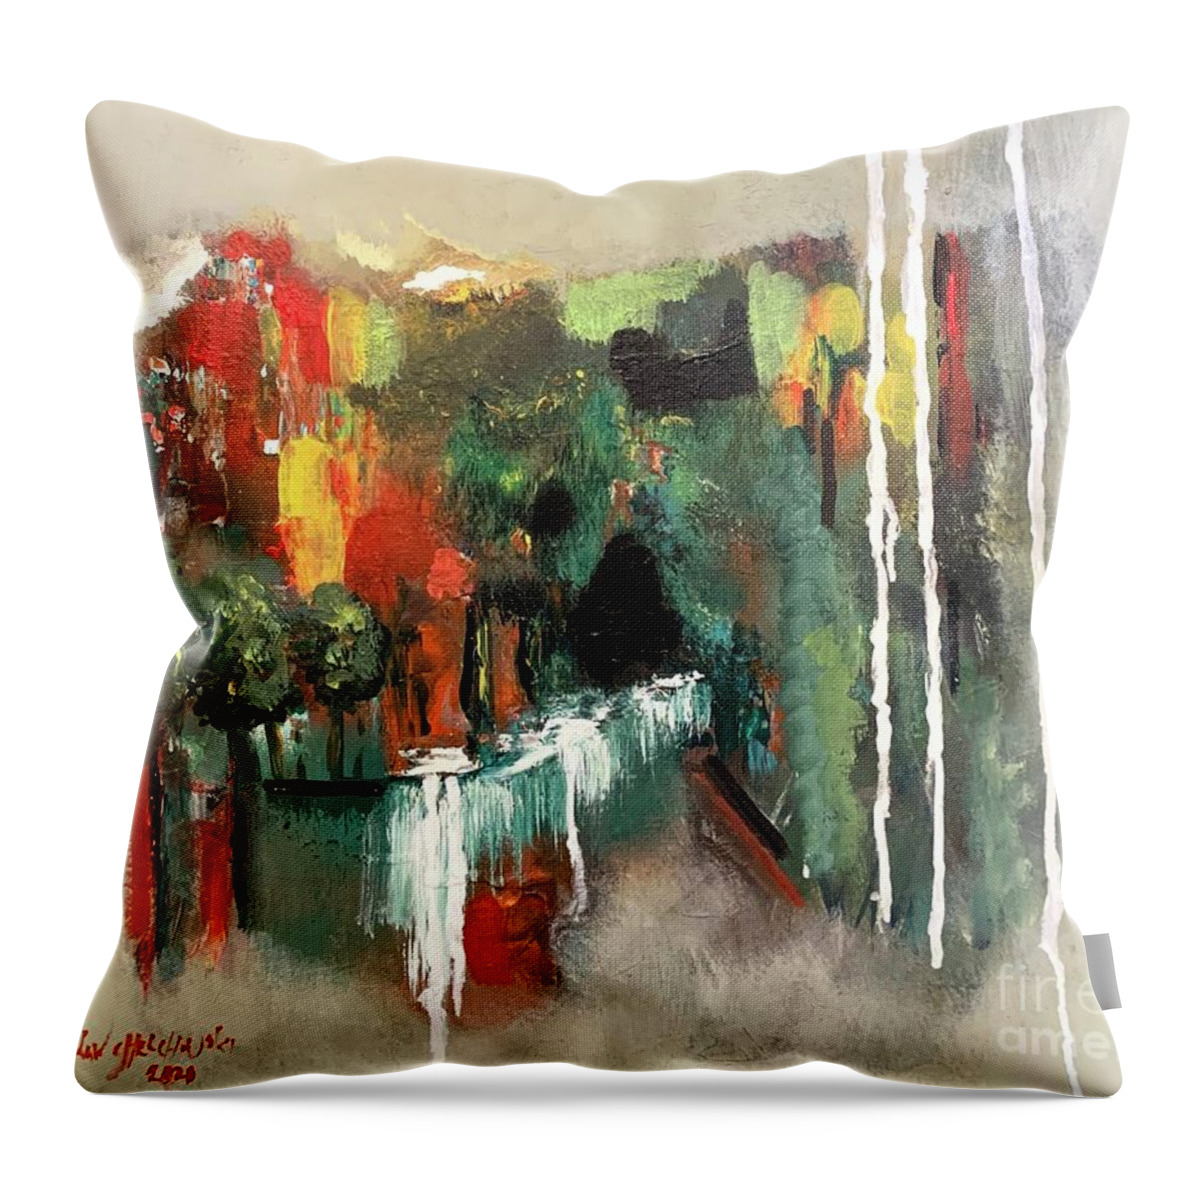 Miroslaw Chelchowski Abstract Landscape Painting Print Acrylic On Canvas Colors Water Trees Red Green Yellow Waterfall Forest Mountain Throw Pillow featuring the painting Abstract landscape by Miroslaw Chelchowski